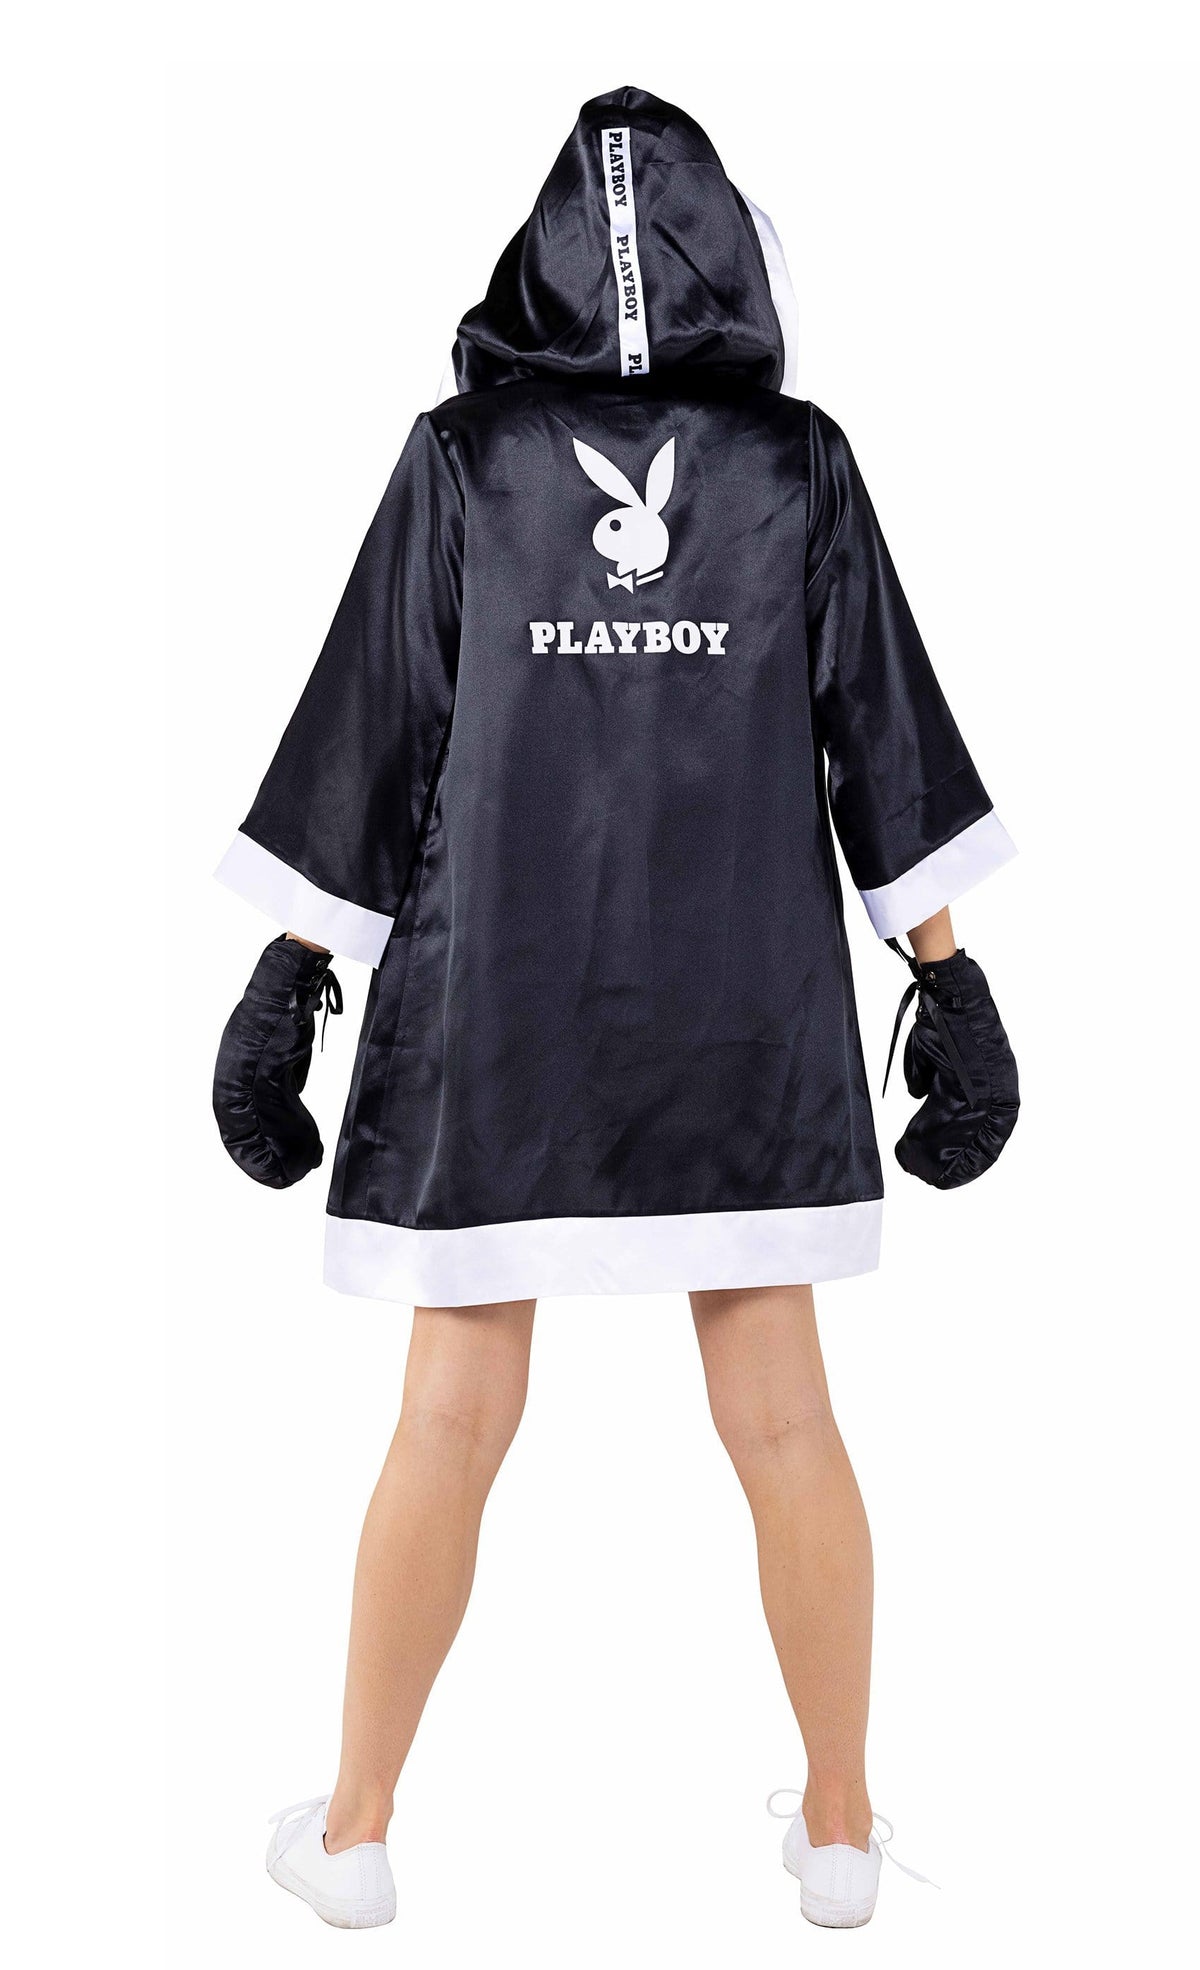 Roma Costume PB125 - 5pc Playboy Knock-Out Boxer